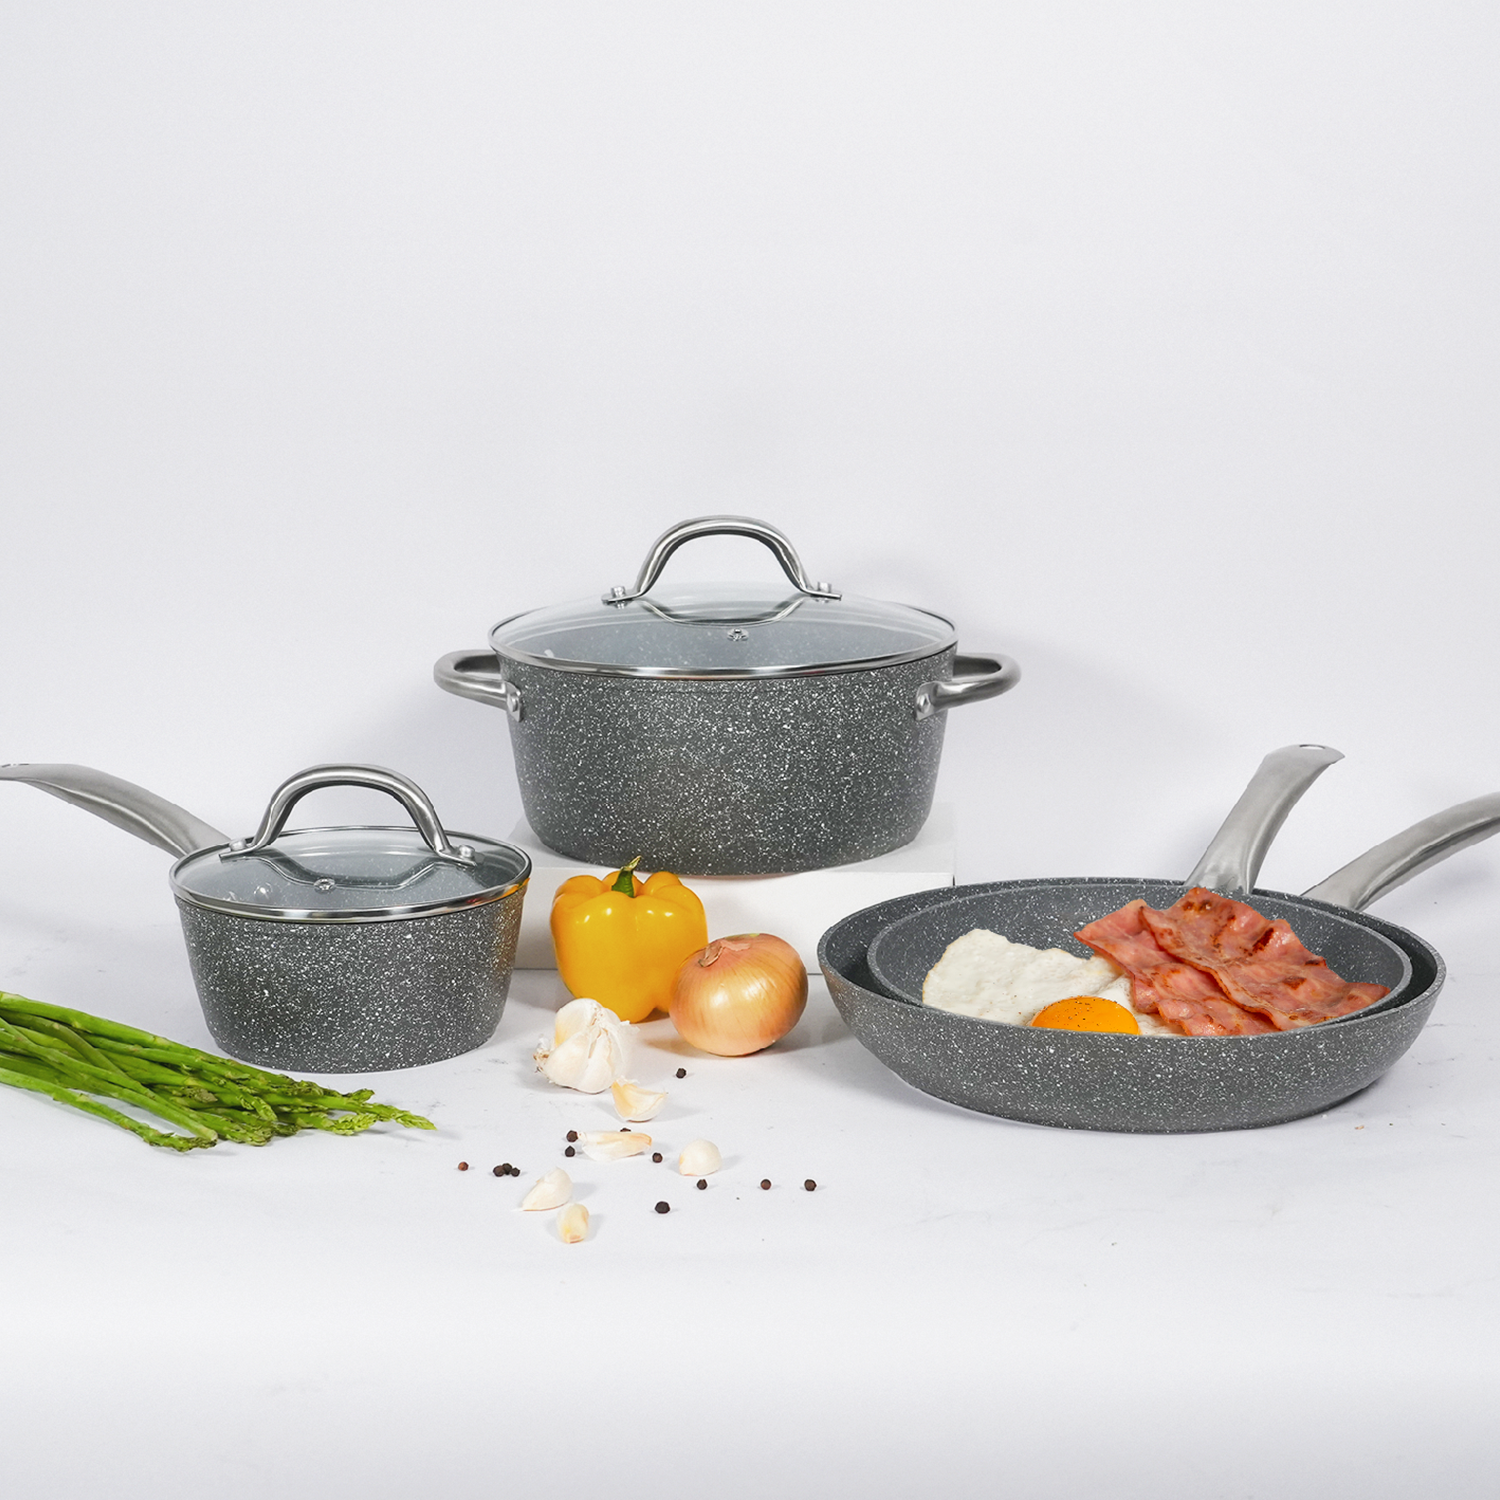 Masflex Forged Stone Aluminum Non-stick Induction Cookware